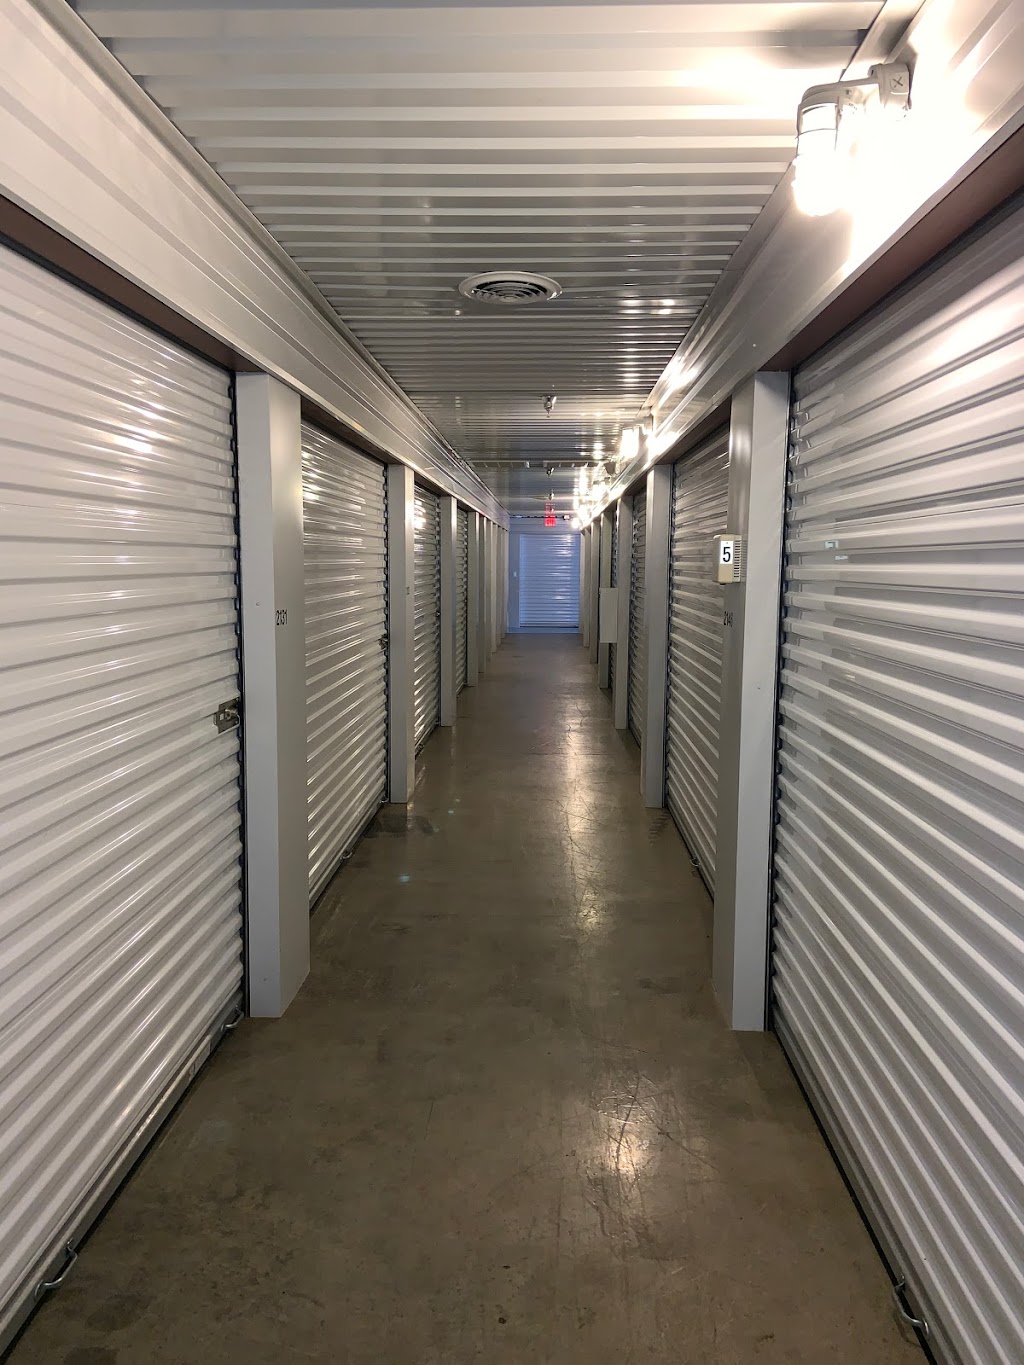 Assured Self Storage - The Colony | 4201 Paige Rd, The Colony, TX 75056, USA | Phone: (972) 435-0559